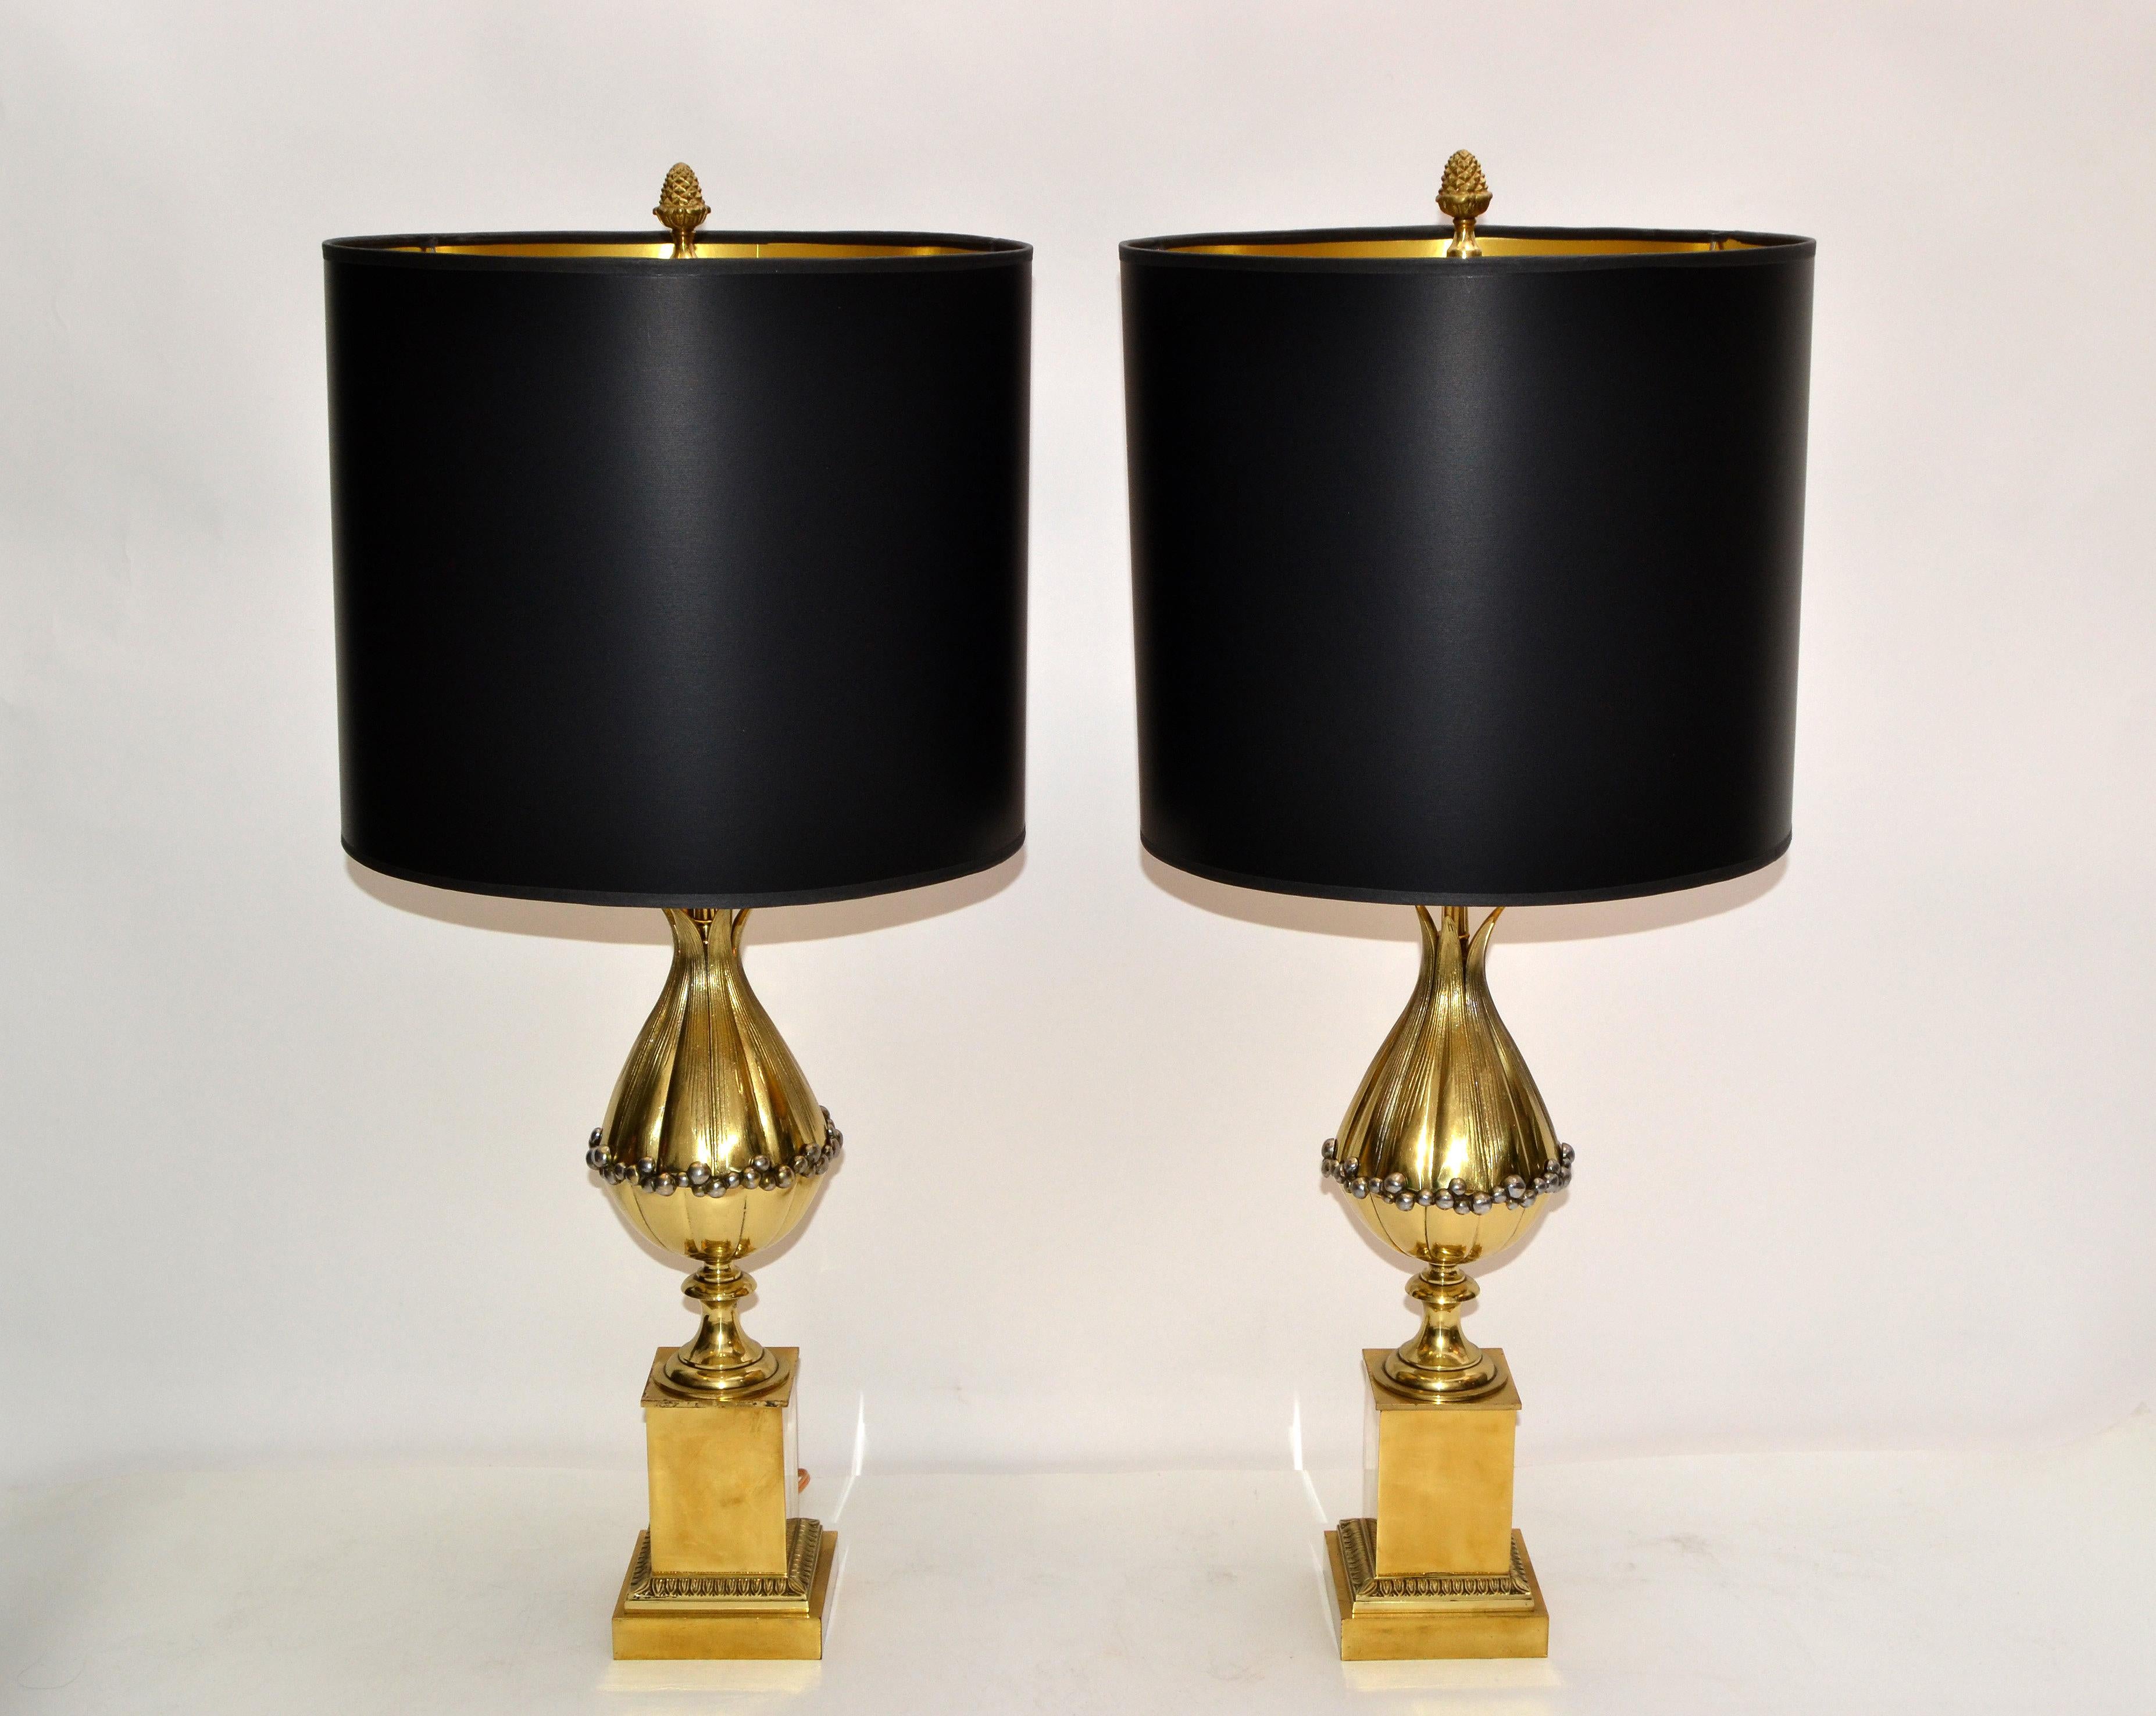 Maison Charles French Art Deco Lotus Bronze Table Lamp Black & Gold Shade, Pair For Sale 7